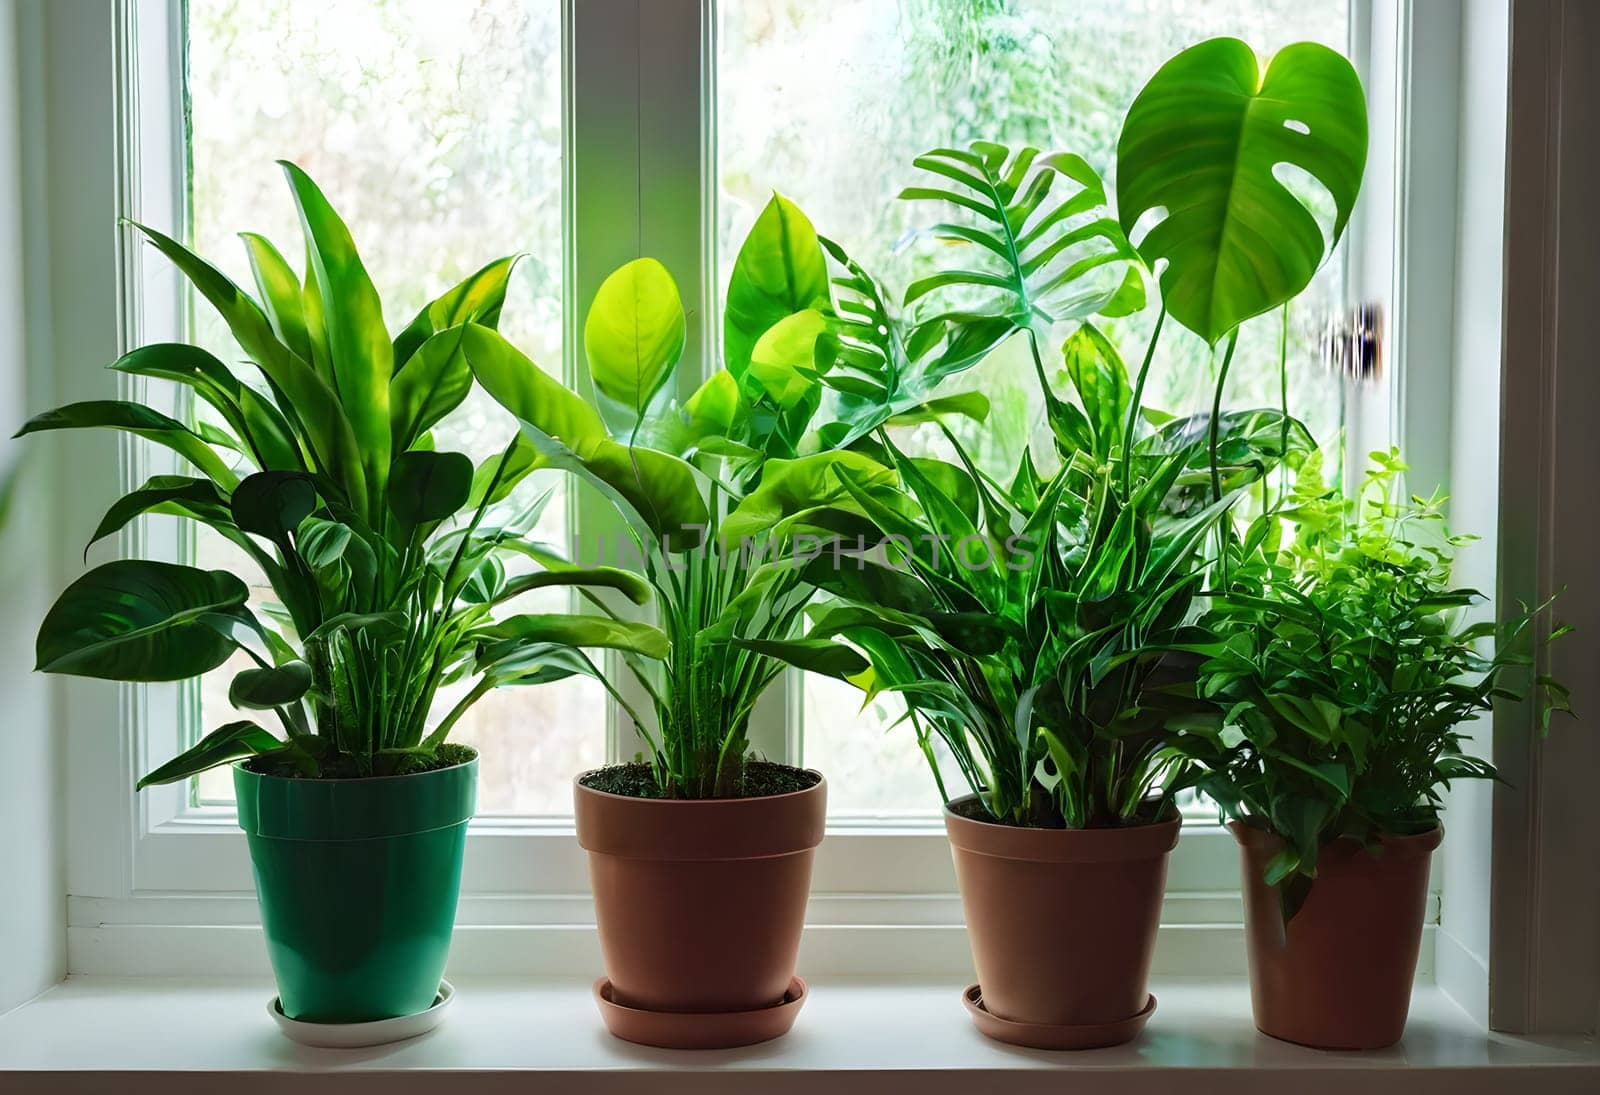 Nature's Charm: Indoor Gardening with Potted Plants by Petrichor